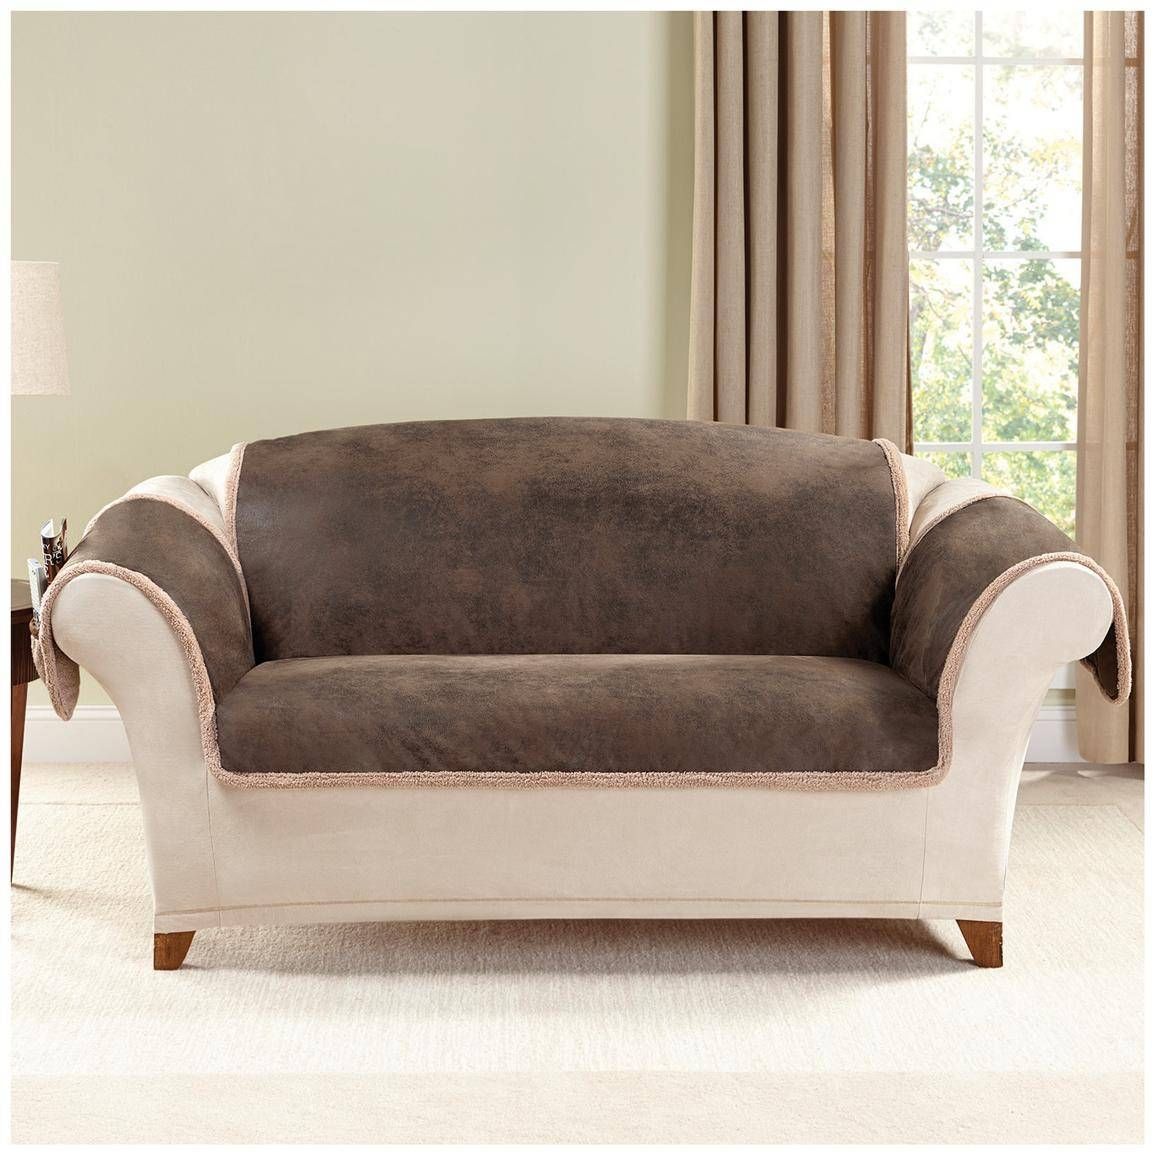 Sure Fit Leather Furn Friend Loveseat Slipcover 581242 In Sofa And Loveseat Covers 